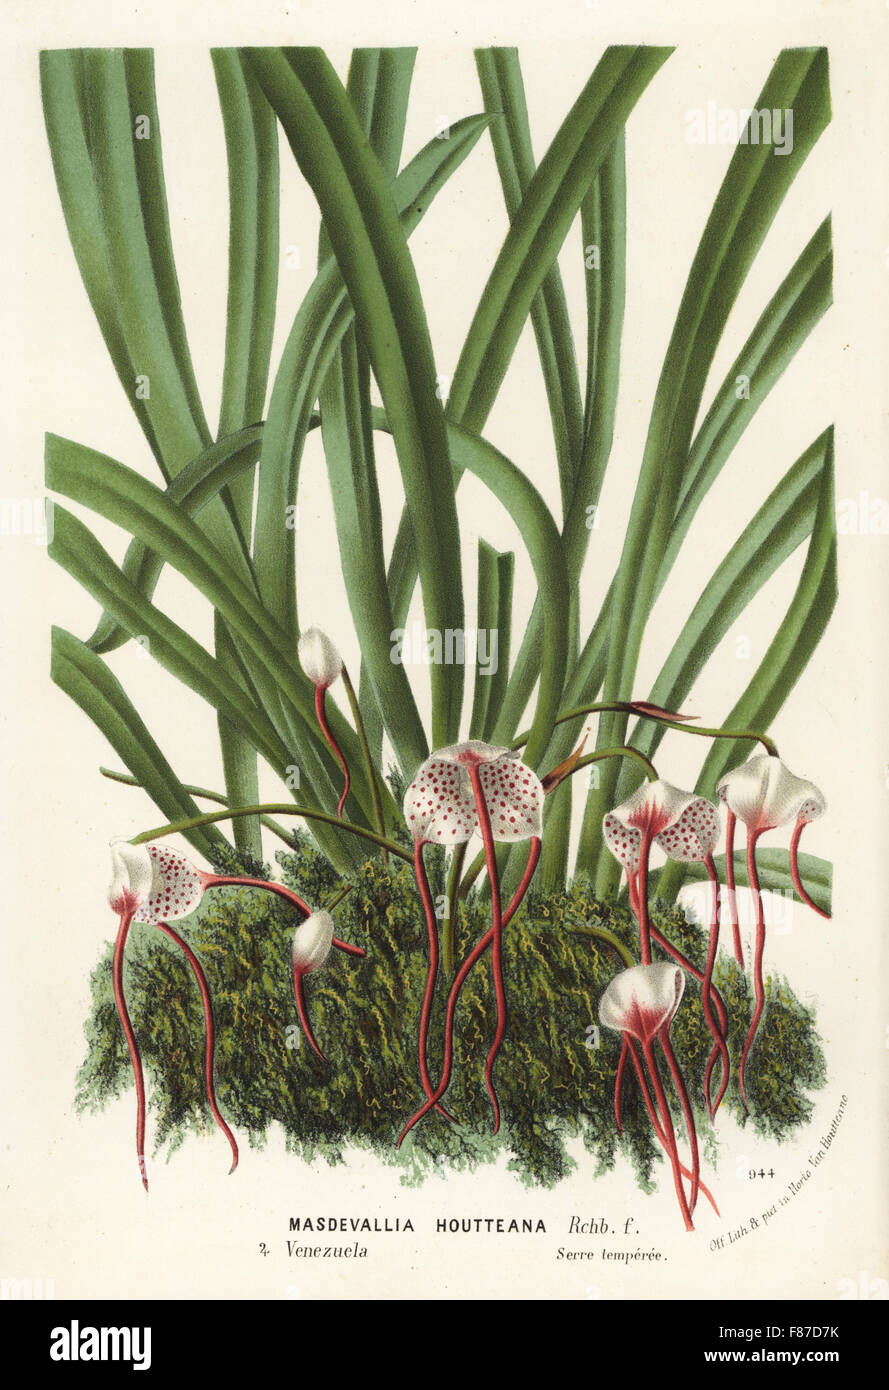 Dracula houtteana orchid (Masdevallia houtteana). Handcoloured lithograph from Louis van Houtte and Charles Lemaire's Flowers of the Gardens and Hothouses of Europe, Flore des Serres et des Jardins de l'Europe, Ghent, Belgium, 1874. Stock Photo